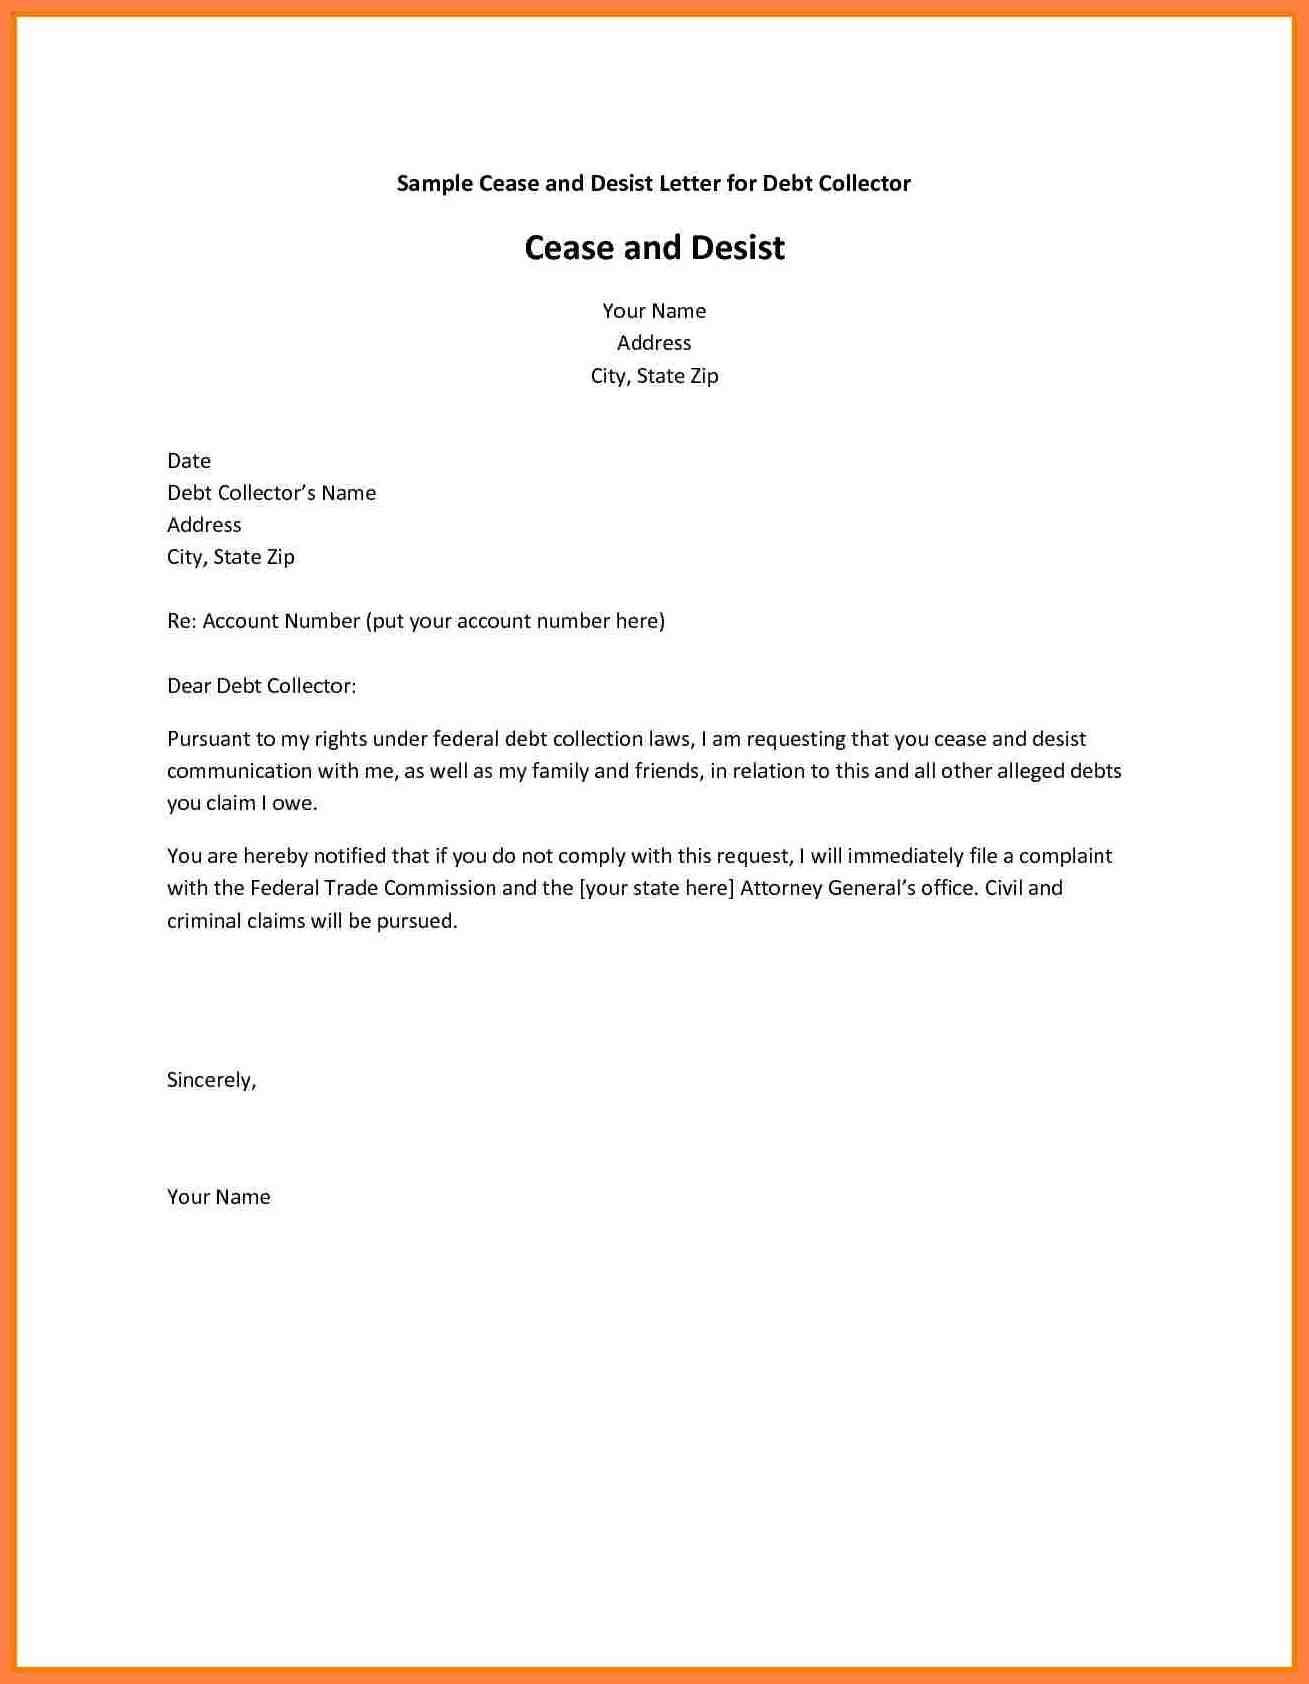 creditor cease and desist letter template example-Cease and Desist Letter Sample Lovely Best Debt Collection Cease and Desist Letter Template 6-q